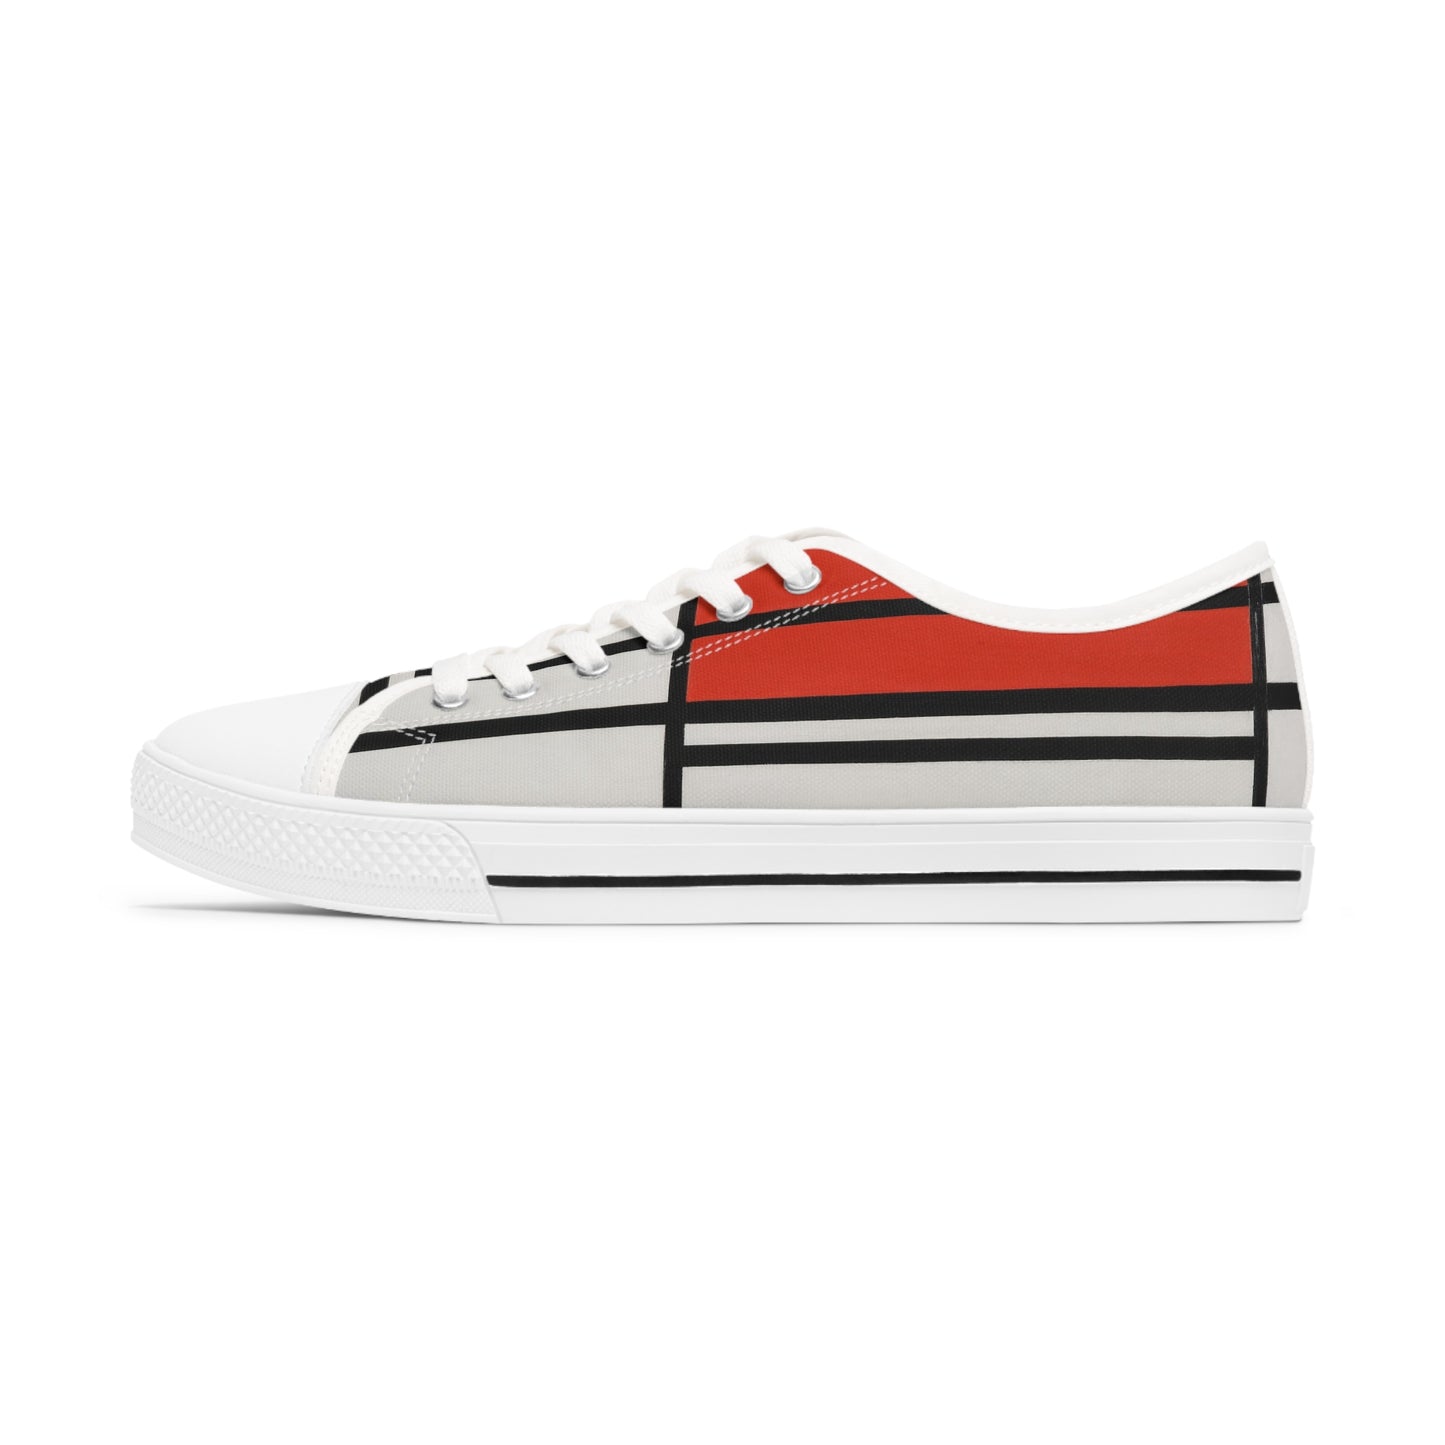 PIET MONDRIAN - COMPOSITION OF RED AND WHITE - LOW TOP ART SNEAKERS FOR HER